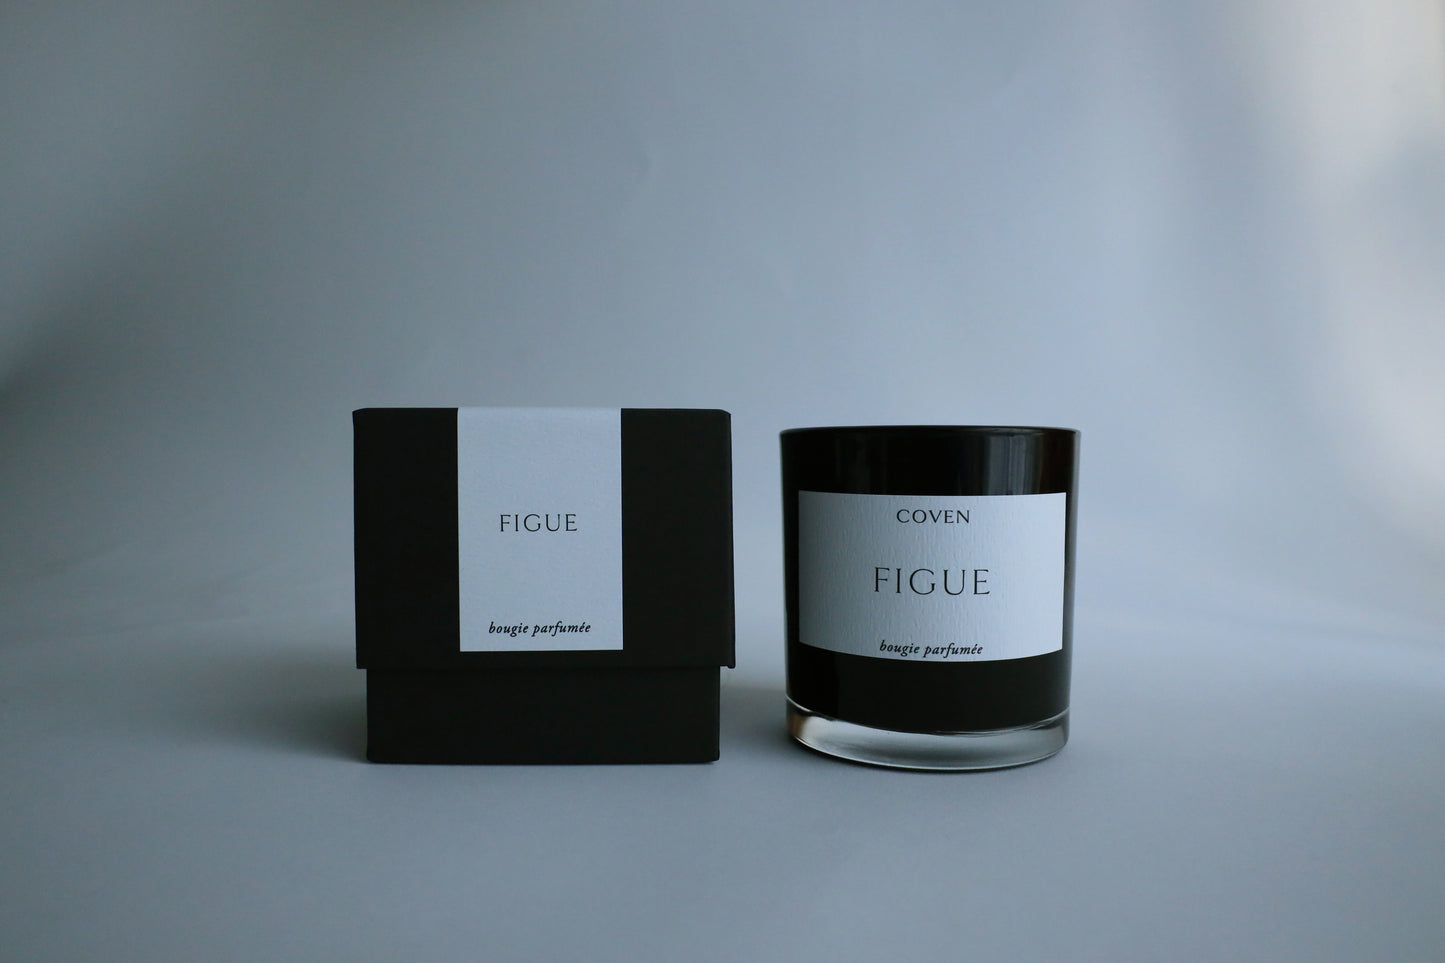 Load image into Gallery viewer, Coven Figue Candle - Luscious Black Fig
